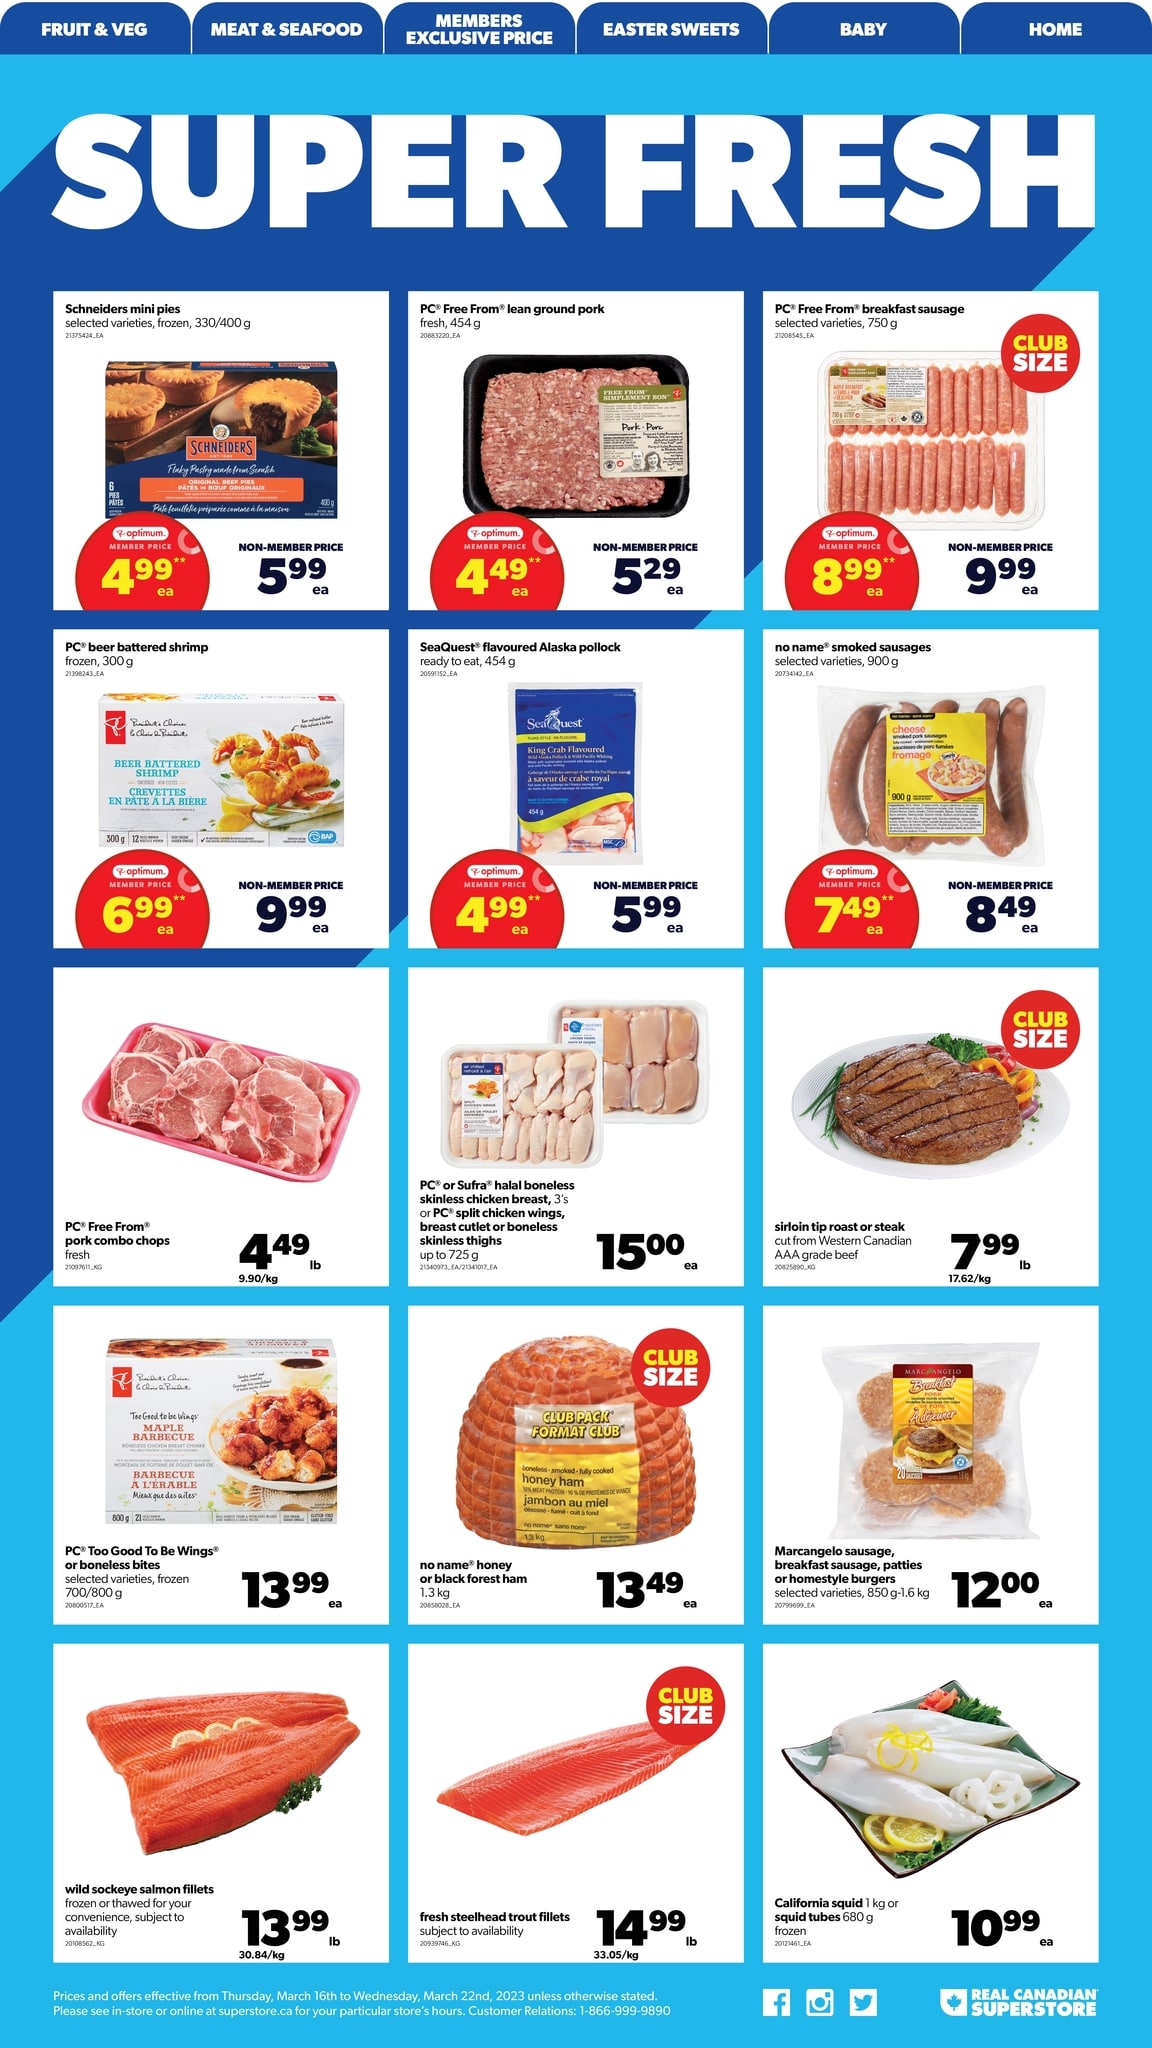 Real Canadian Superstore - Western Canada - Weekly Flyer Specials - Page 3